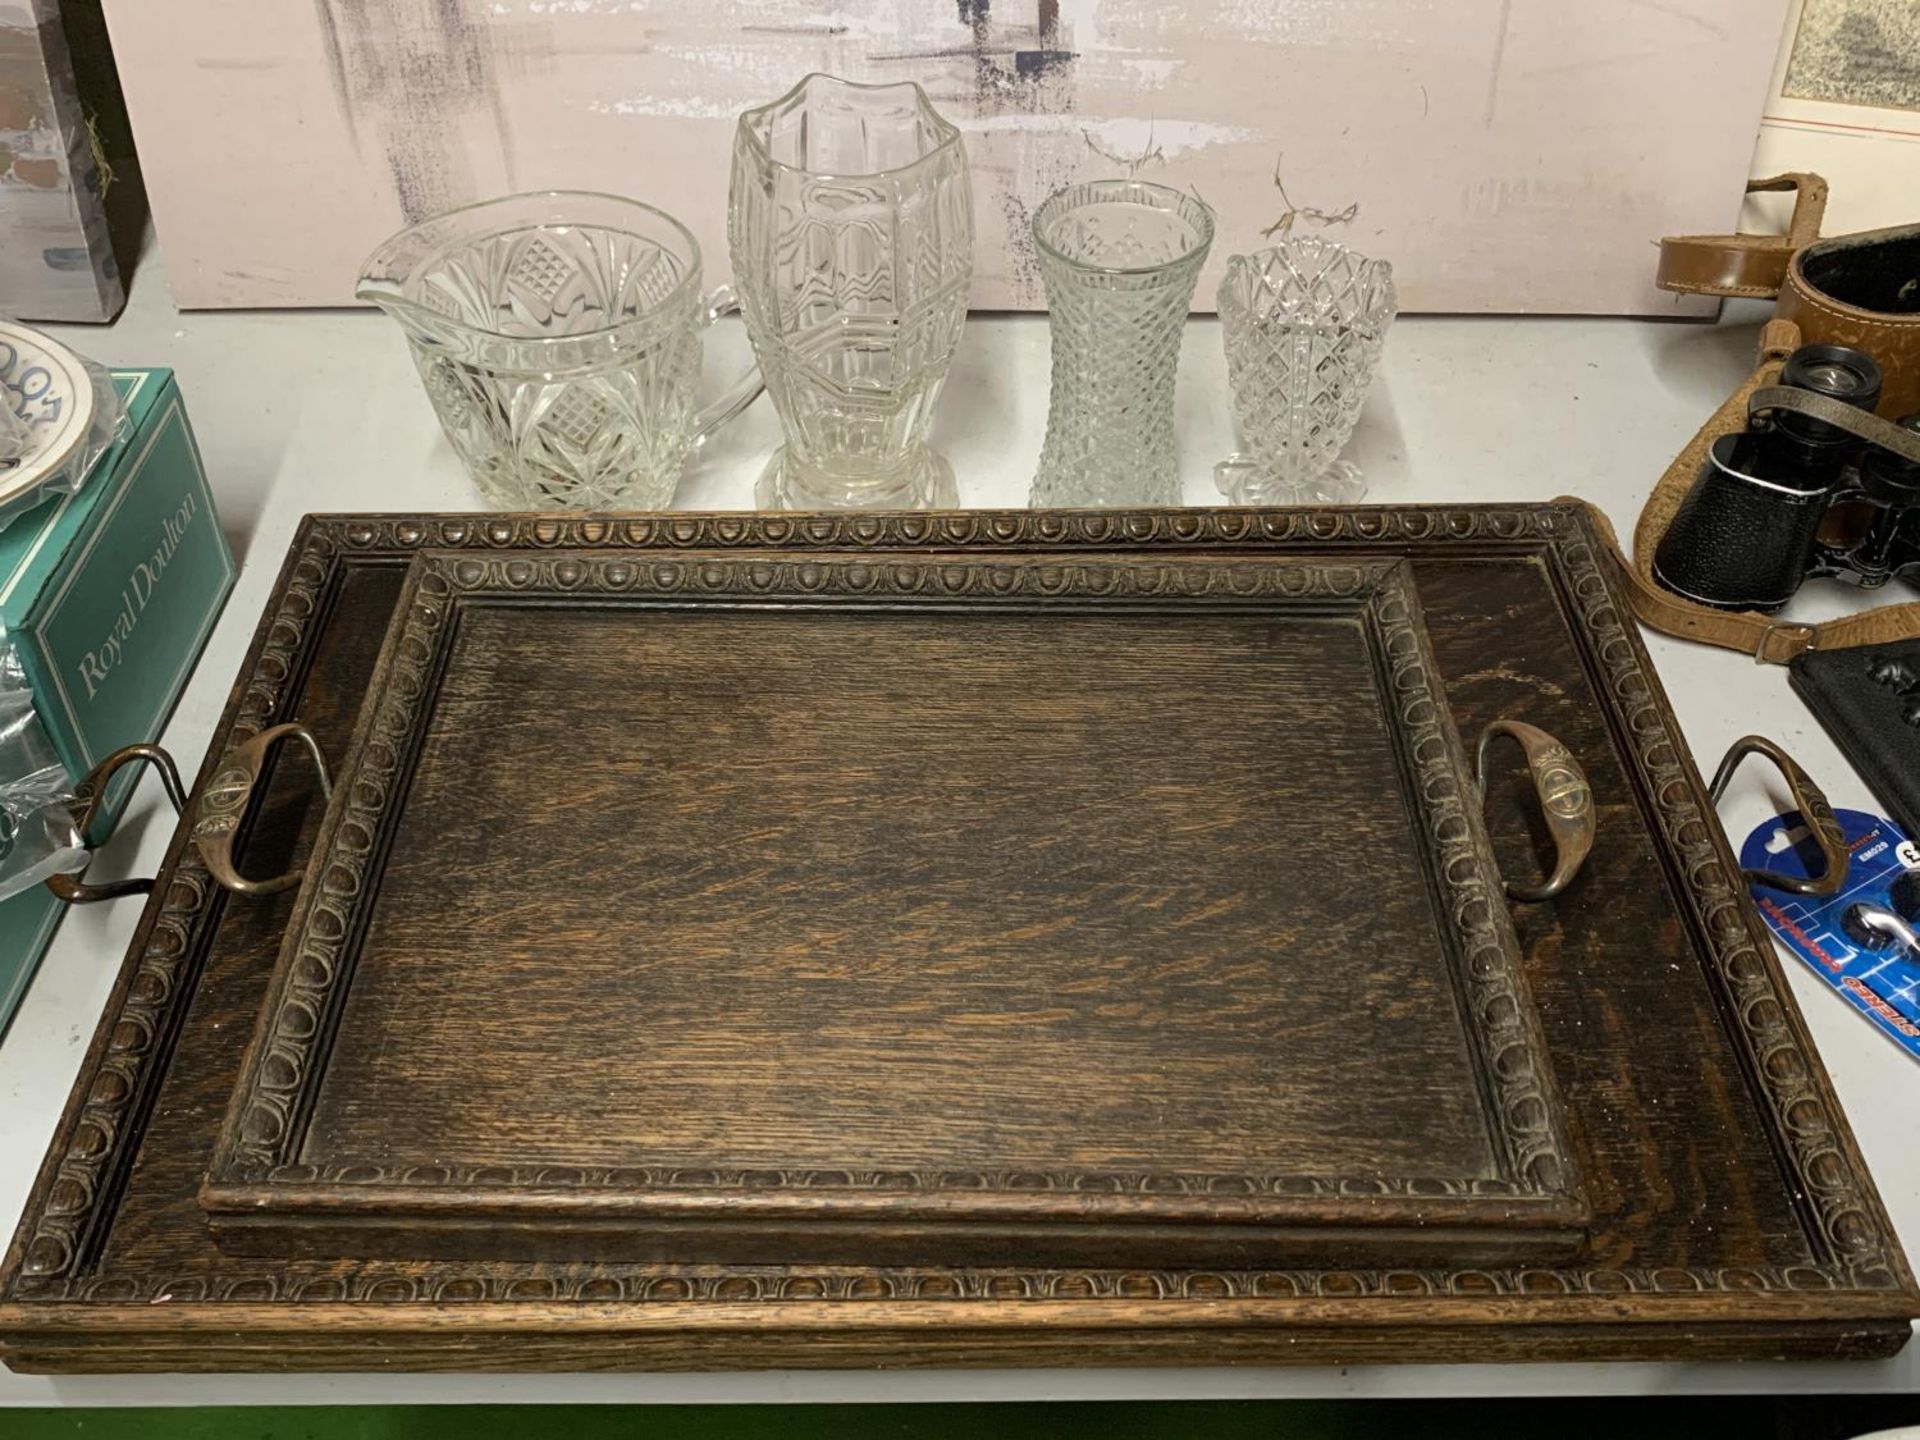 TWO VINTAGE OAK TRAYS WITH COPPER HANDLES STAMPED 'DUNSTAN', GLASS VASES, ETC